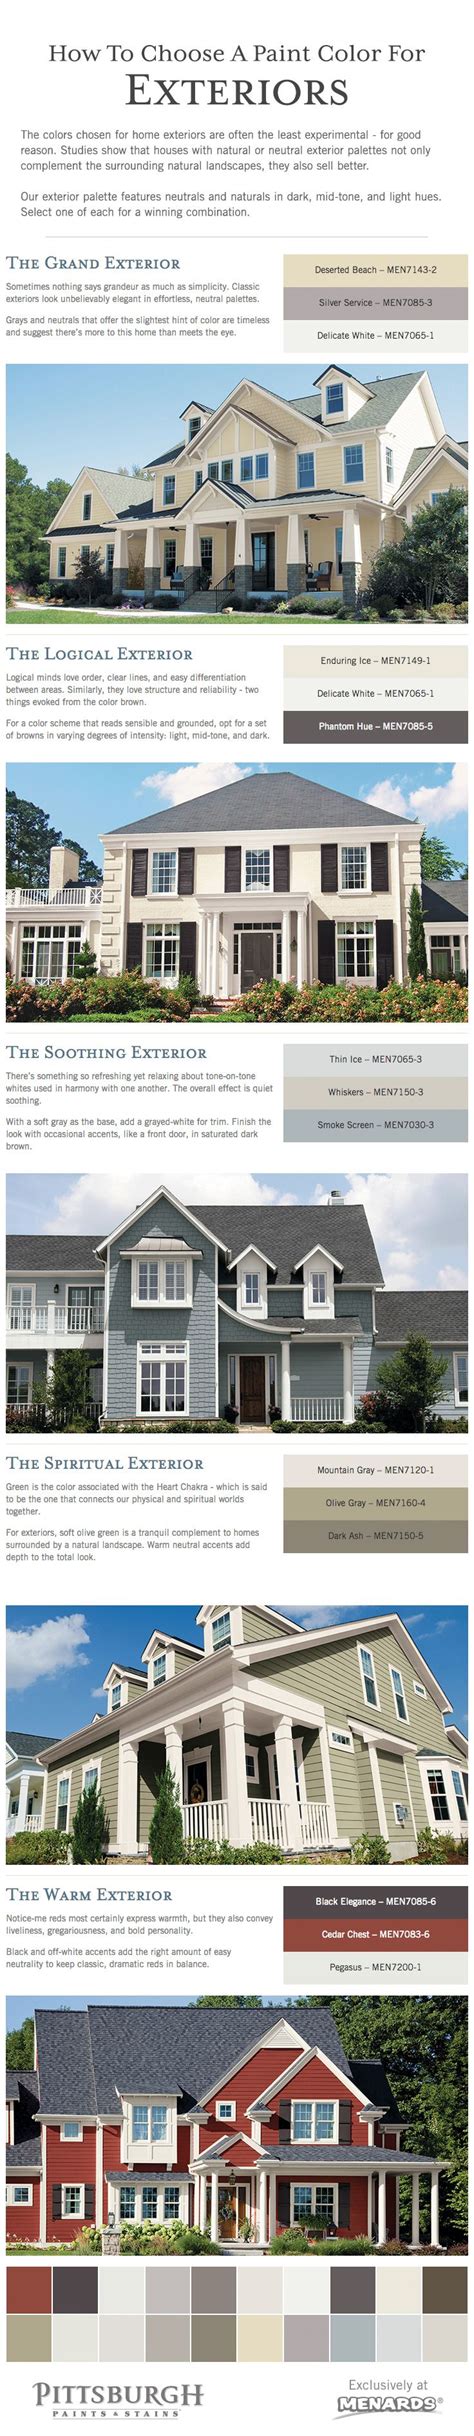 How To Choose An Exterior Paint Color For Your Home Tips